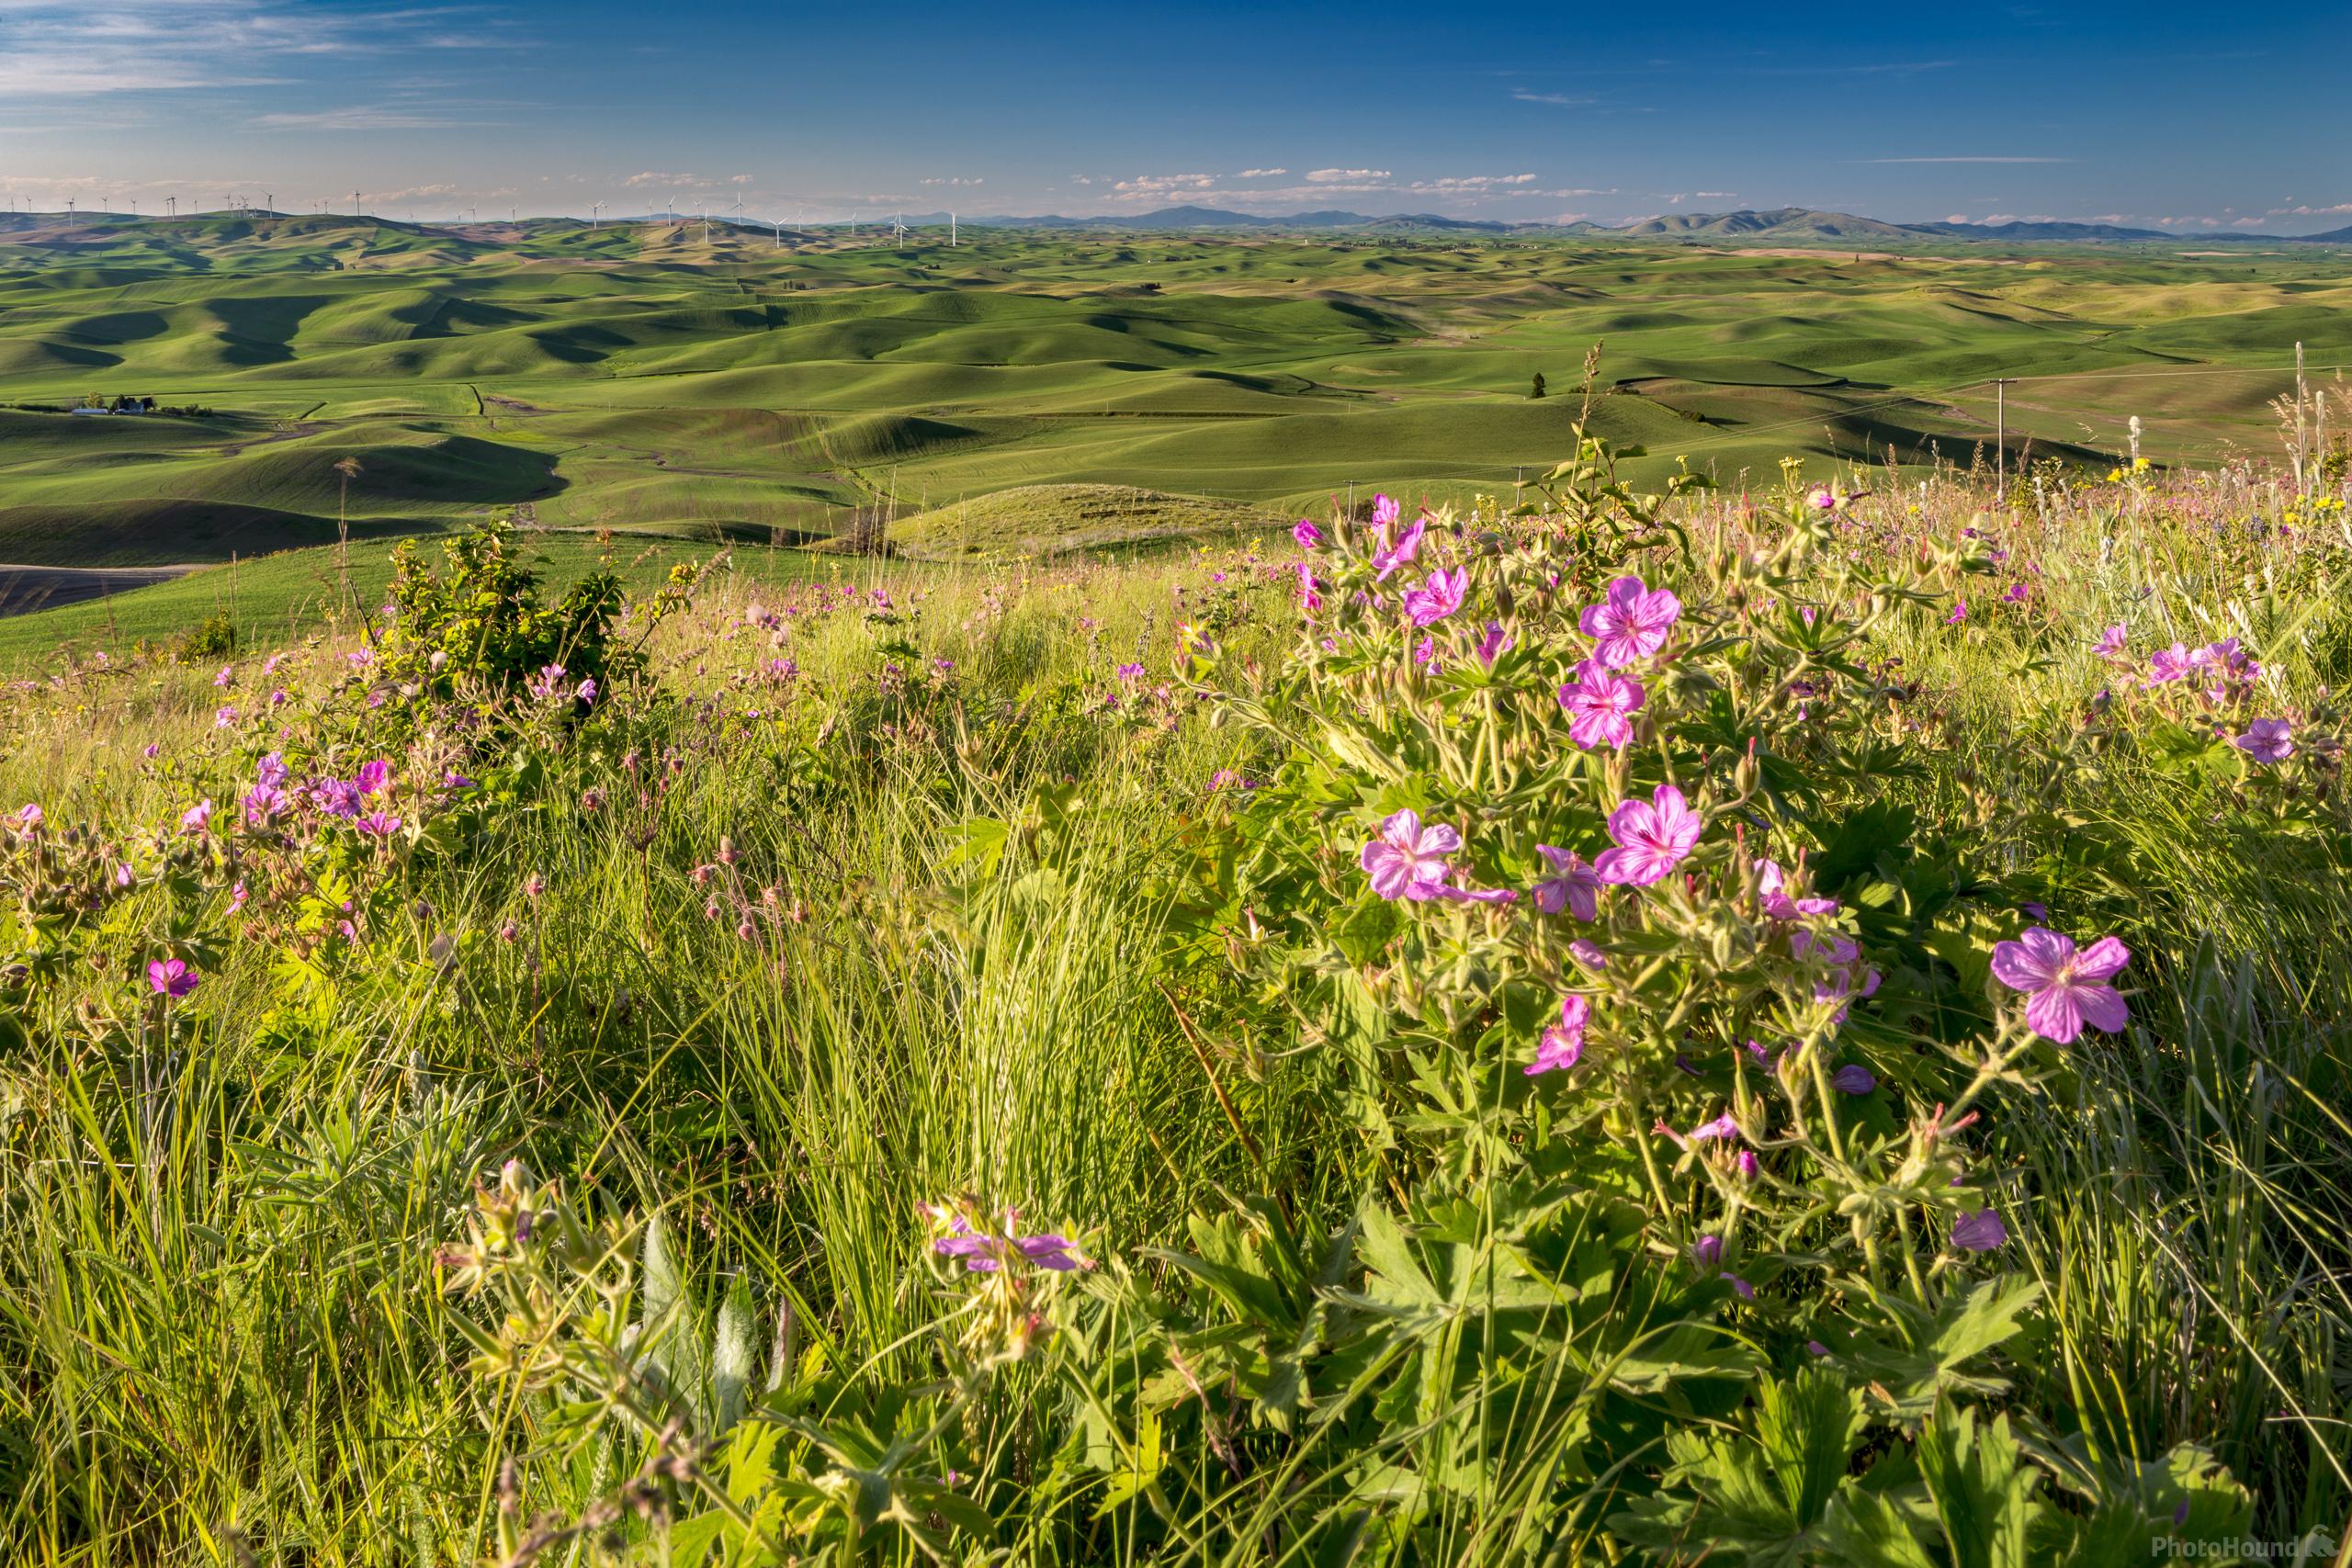 Image of North Steptoe Butte Viewpoints by Joe Becker